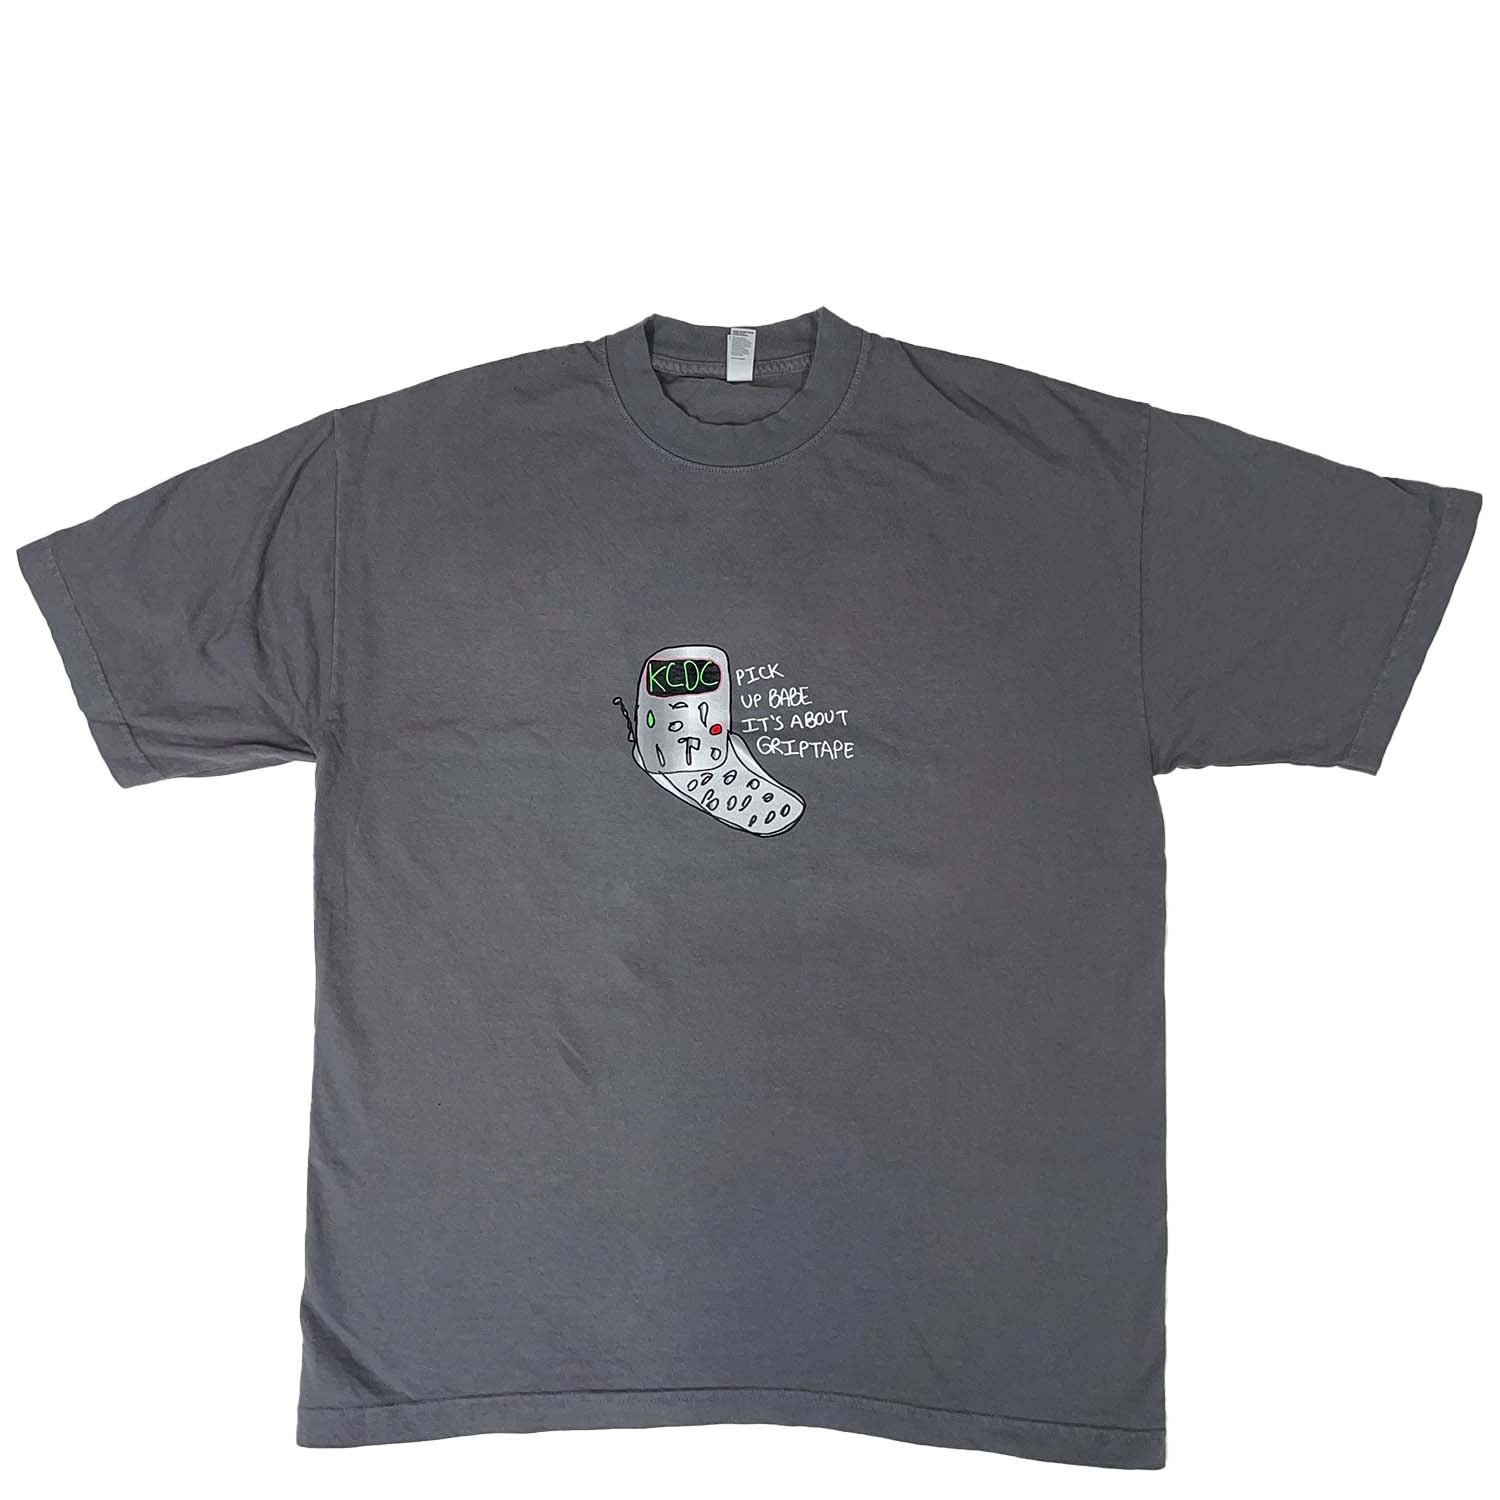 KCDC Skateshop Cellphone Tee Charcoal Grey by Jacob Campbell